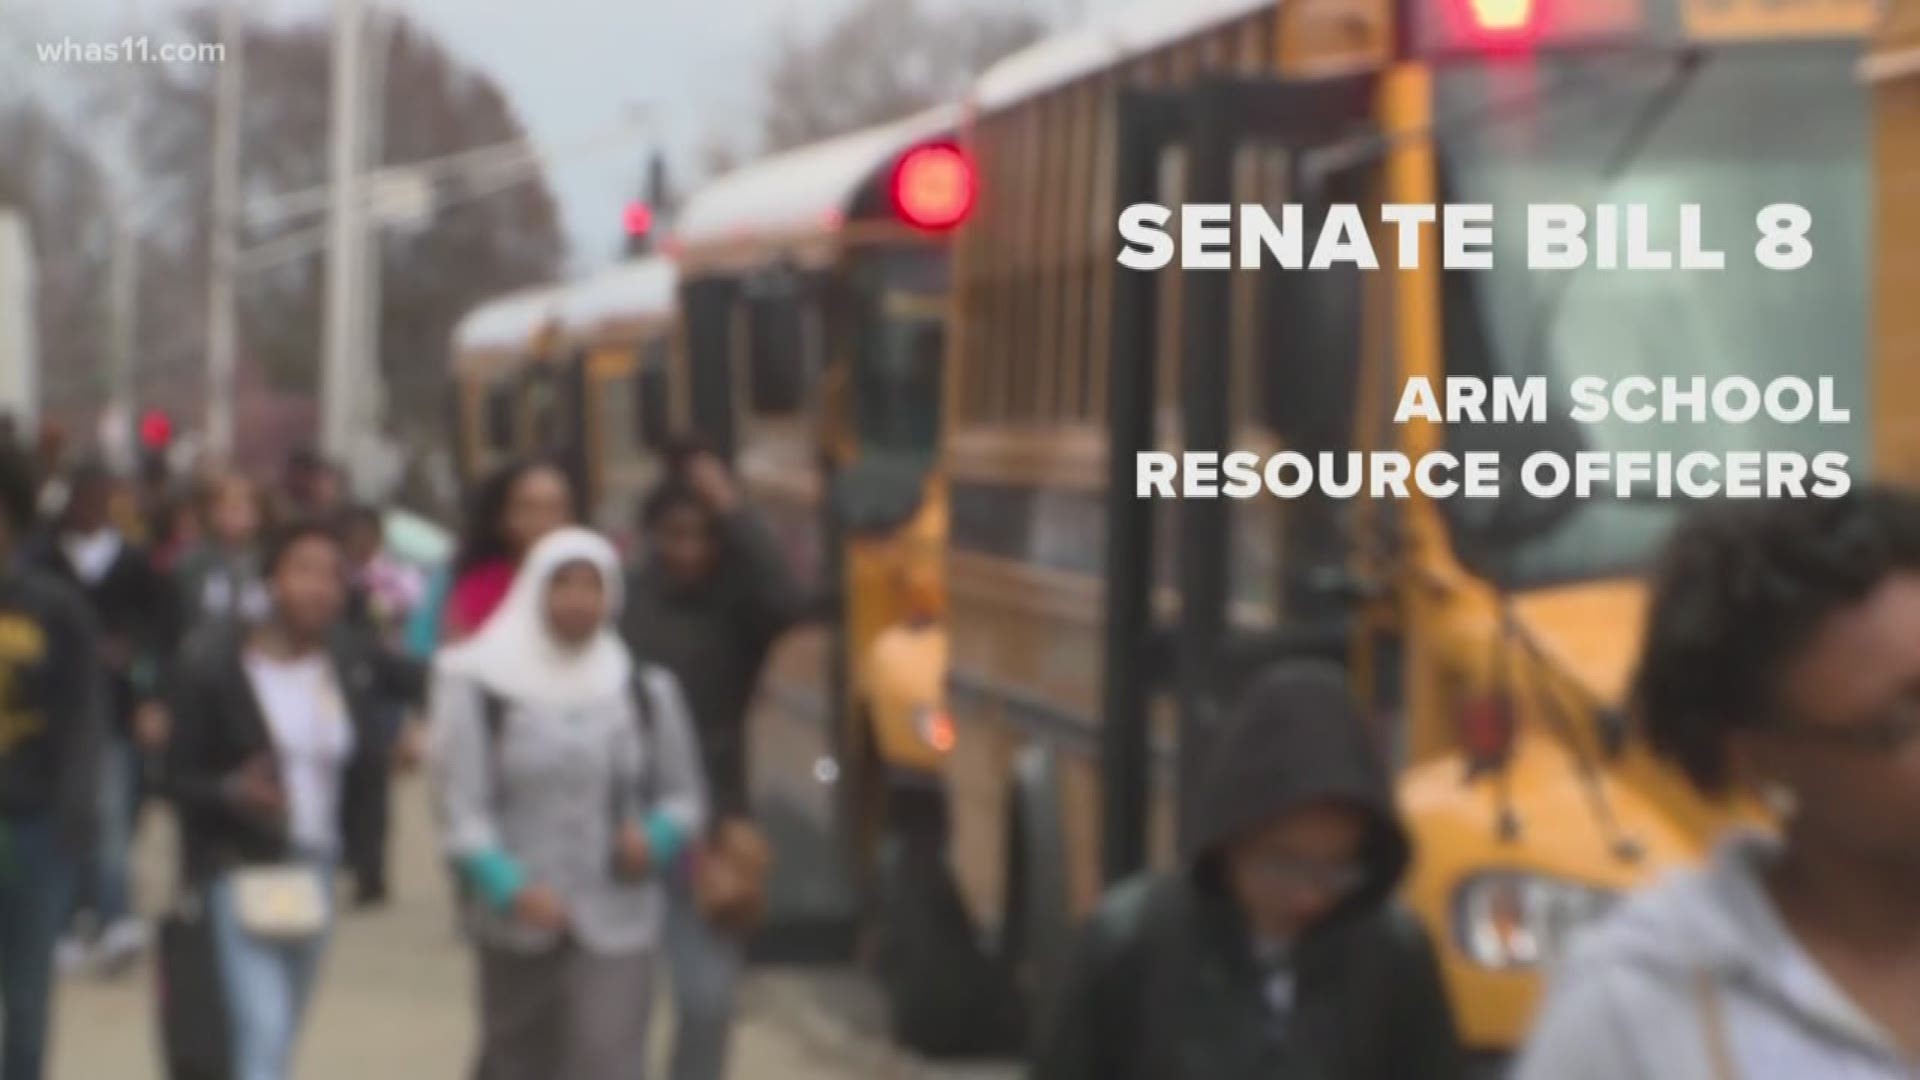 Senate Bill 8 debate focuses on response time and concerns by students.